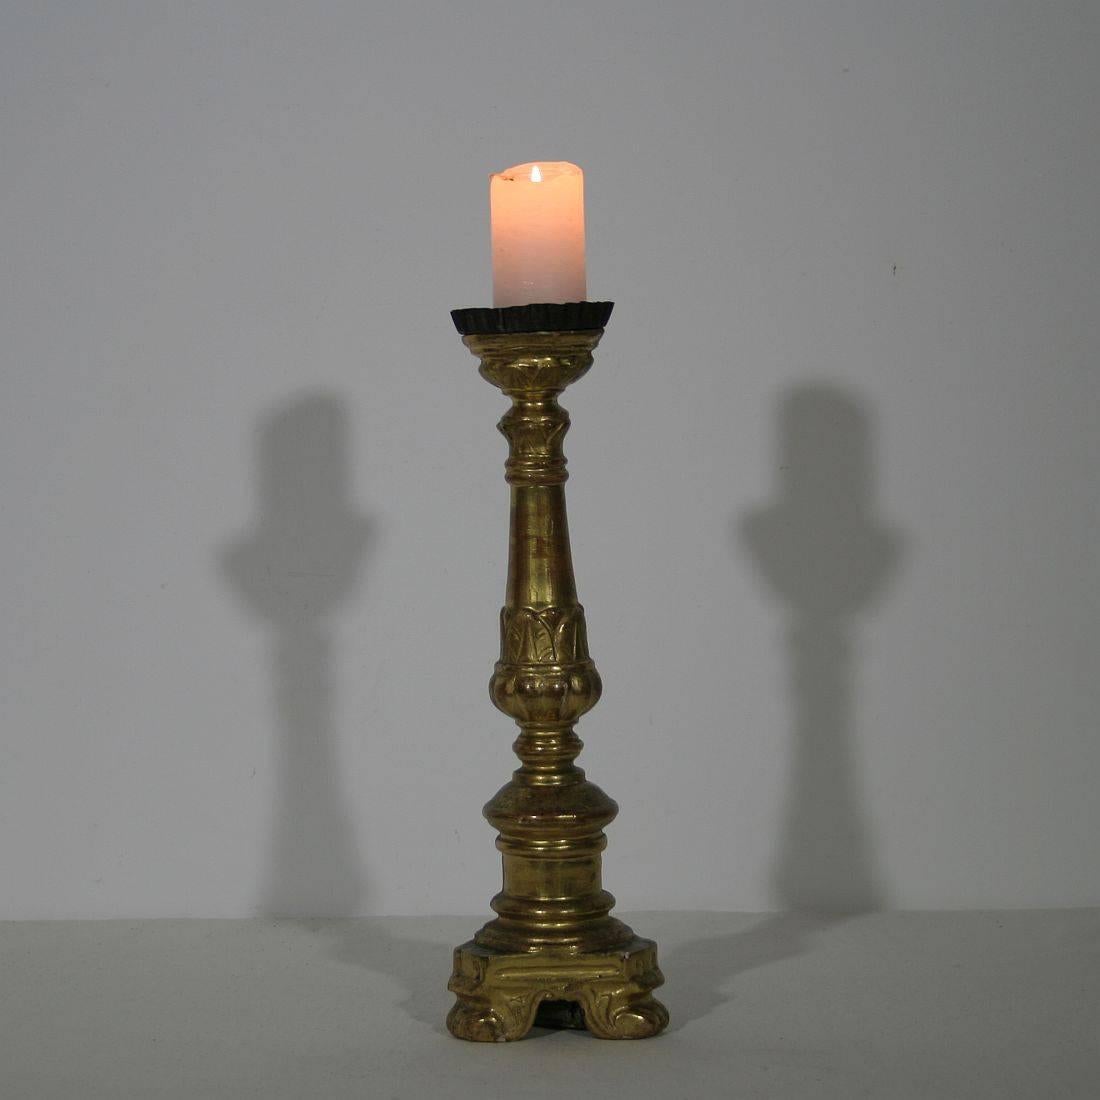 This small giltwood Italian candlestick was originally used on the altar of a church. It was hand-carved and exquisitely gilded on only one side as a means of economy for the Church. Great piece. Weathered and small losses